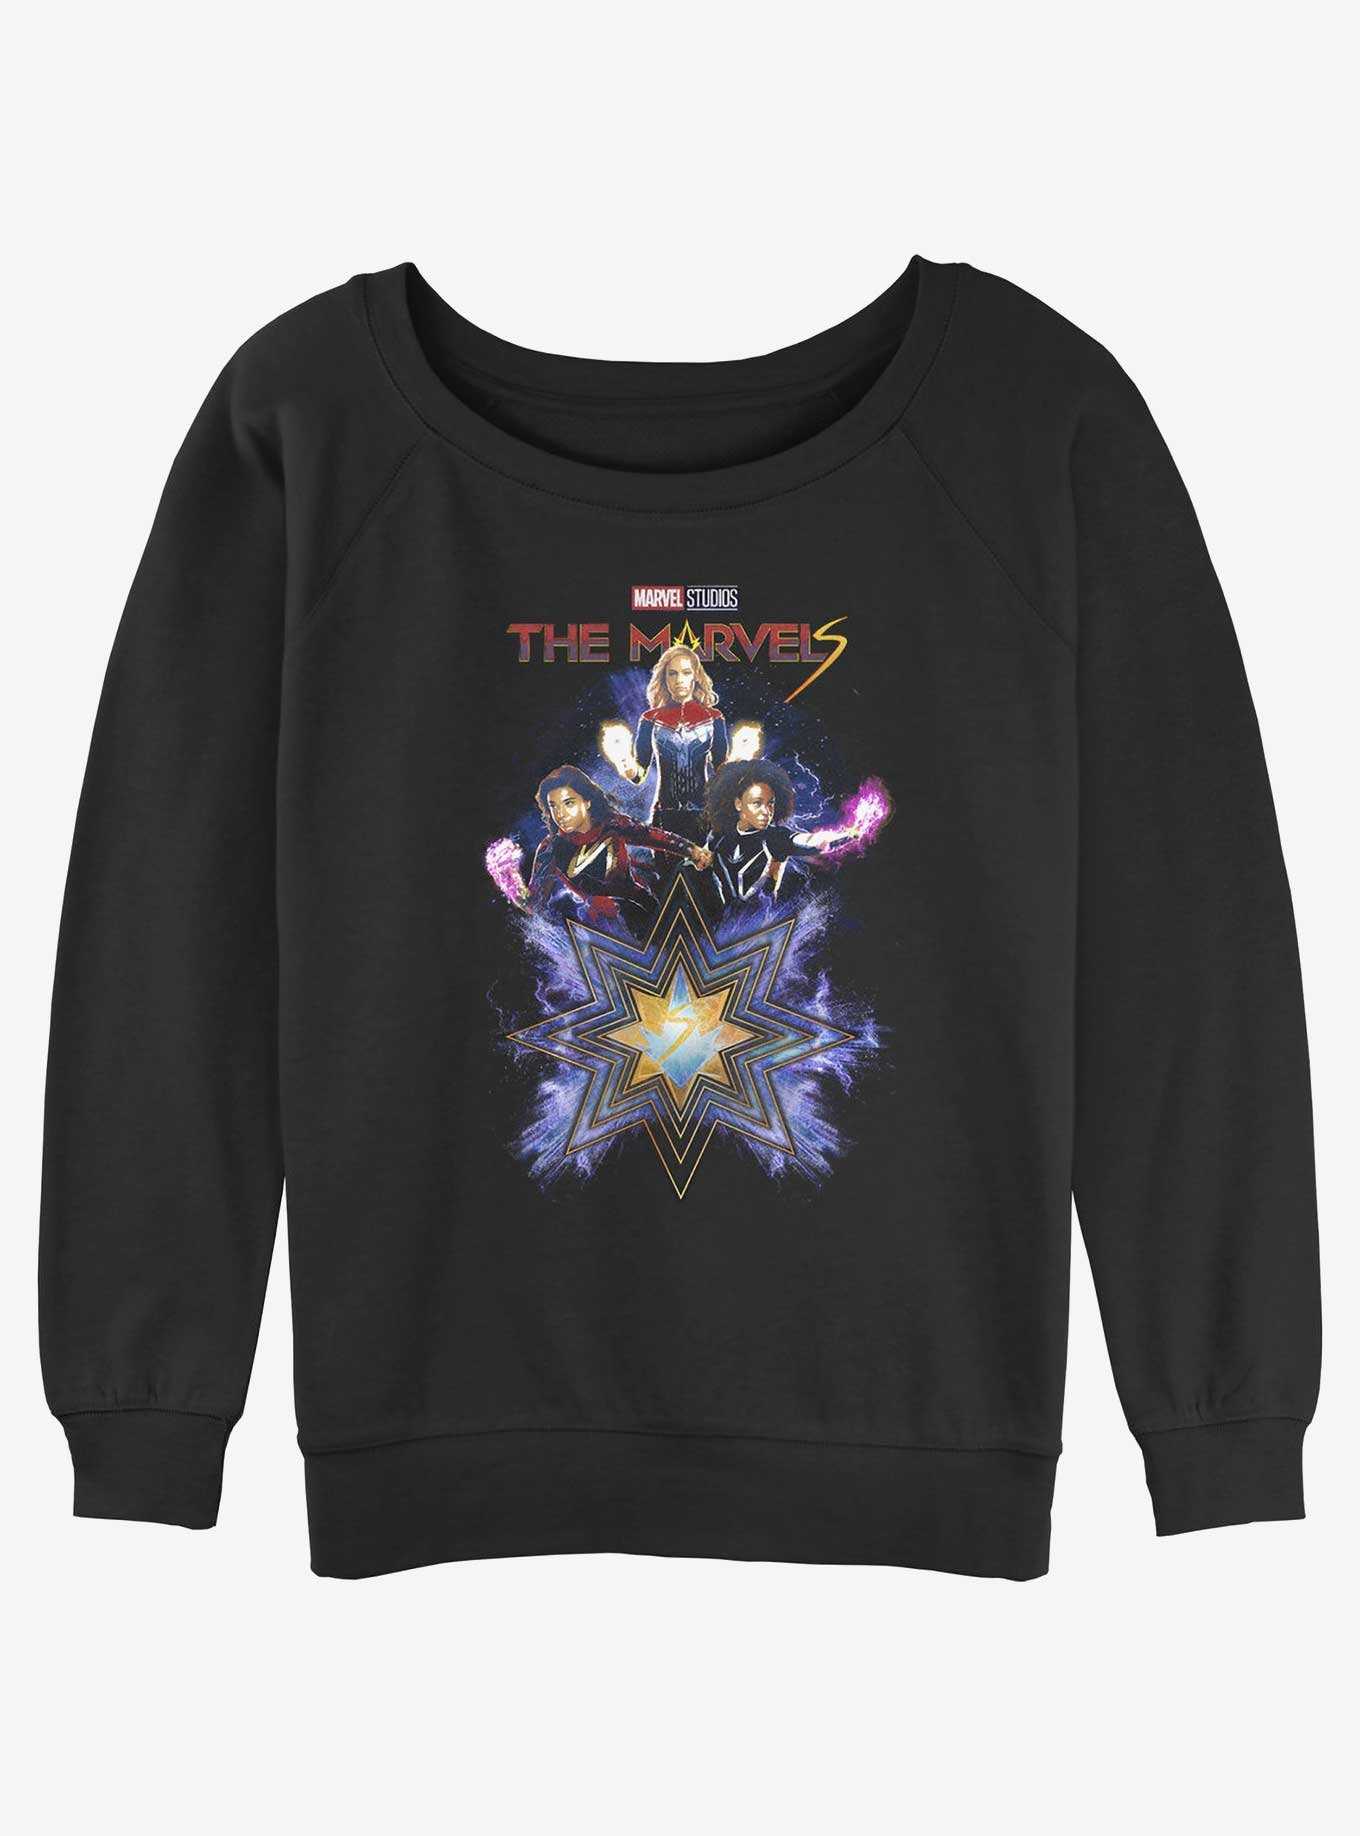 Marvel The Marvels Fabulous Marvels Girls Slouchy Sweatshirt Hot Topic Web Exclusive, , hi-res